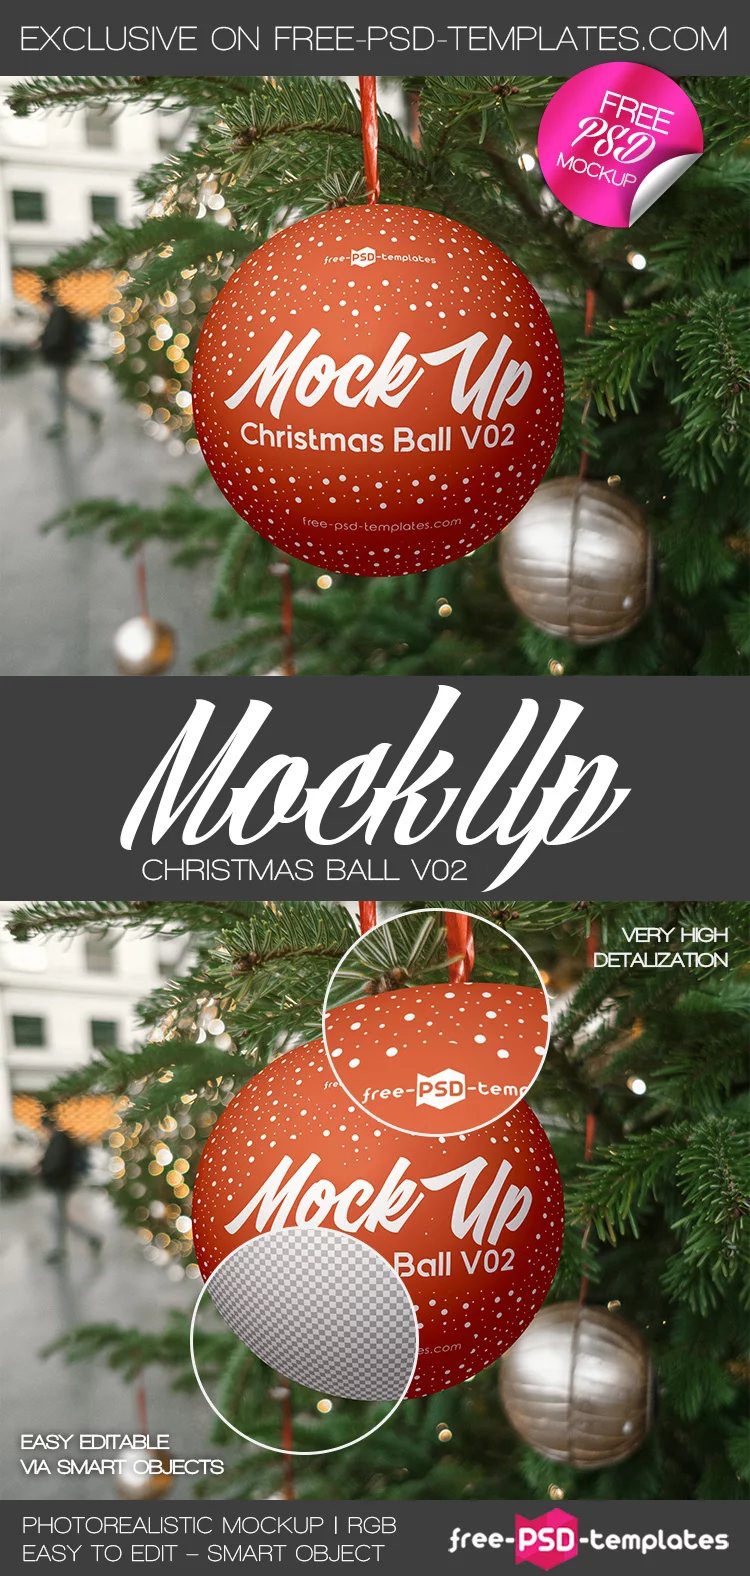 Free Christmas Ball V02 Mock-up in PSD